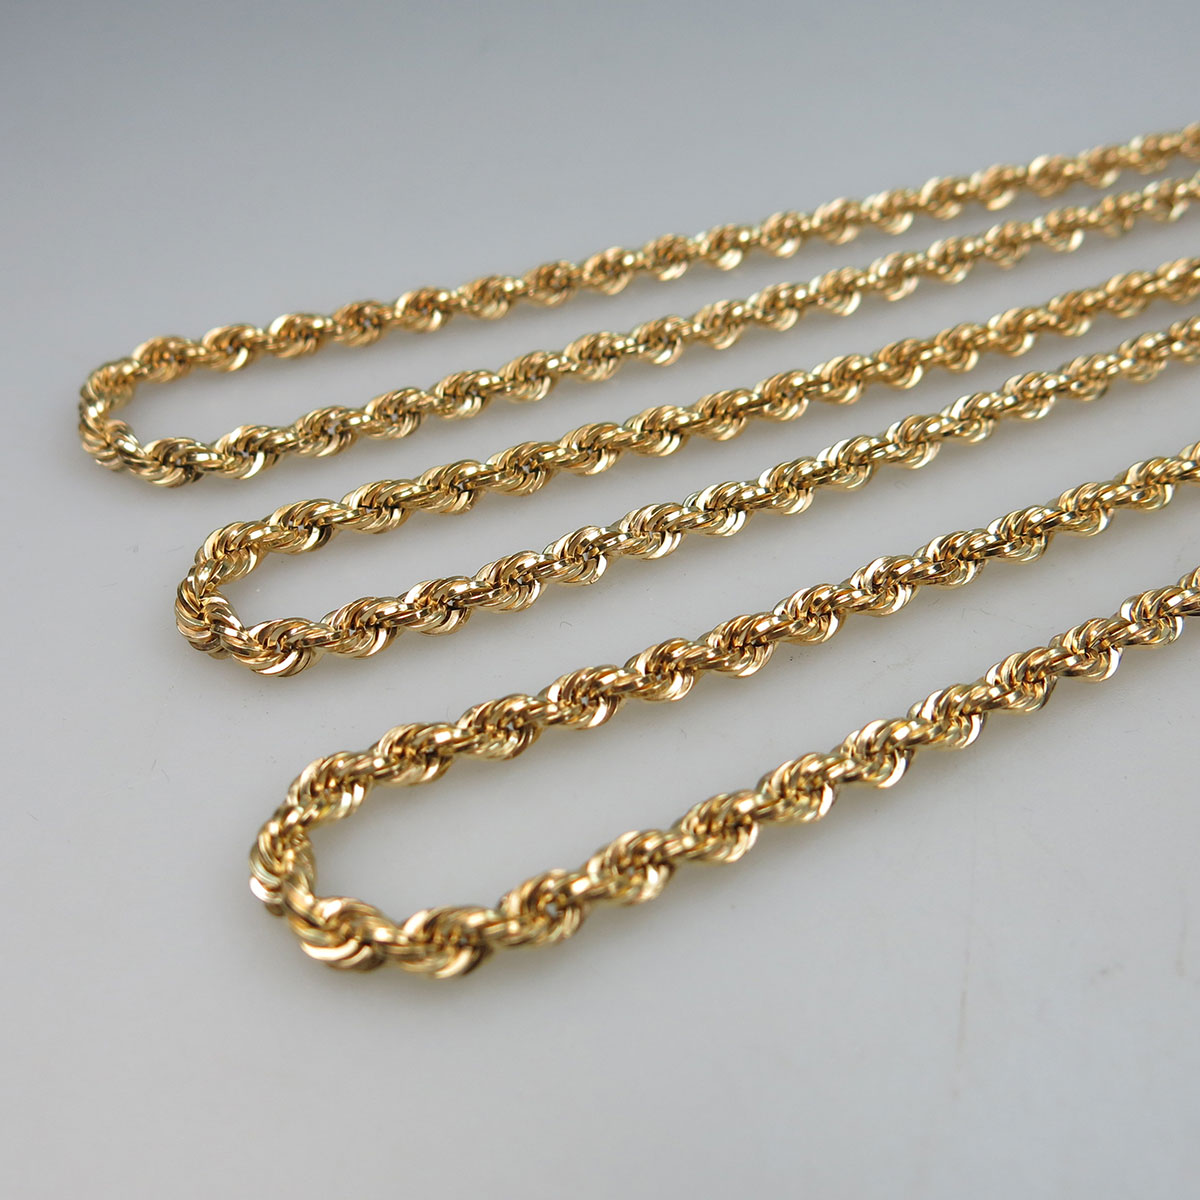 3 x 18k Yellow Gold Rope Chains